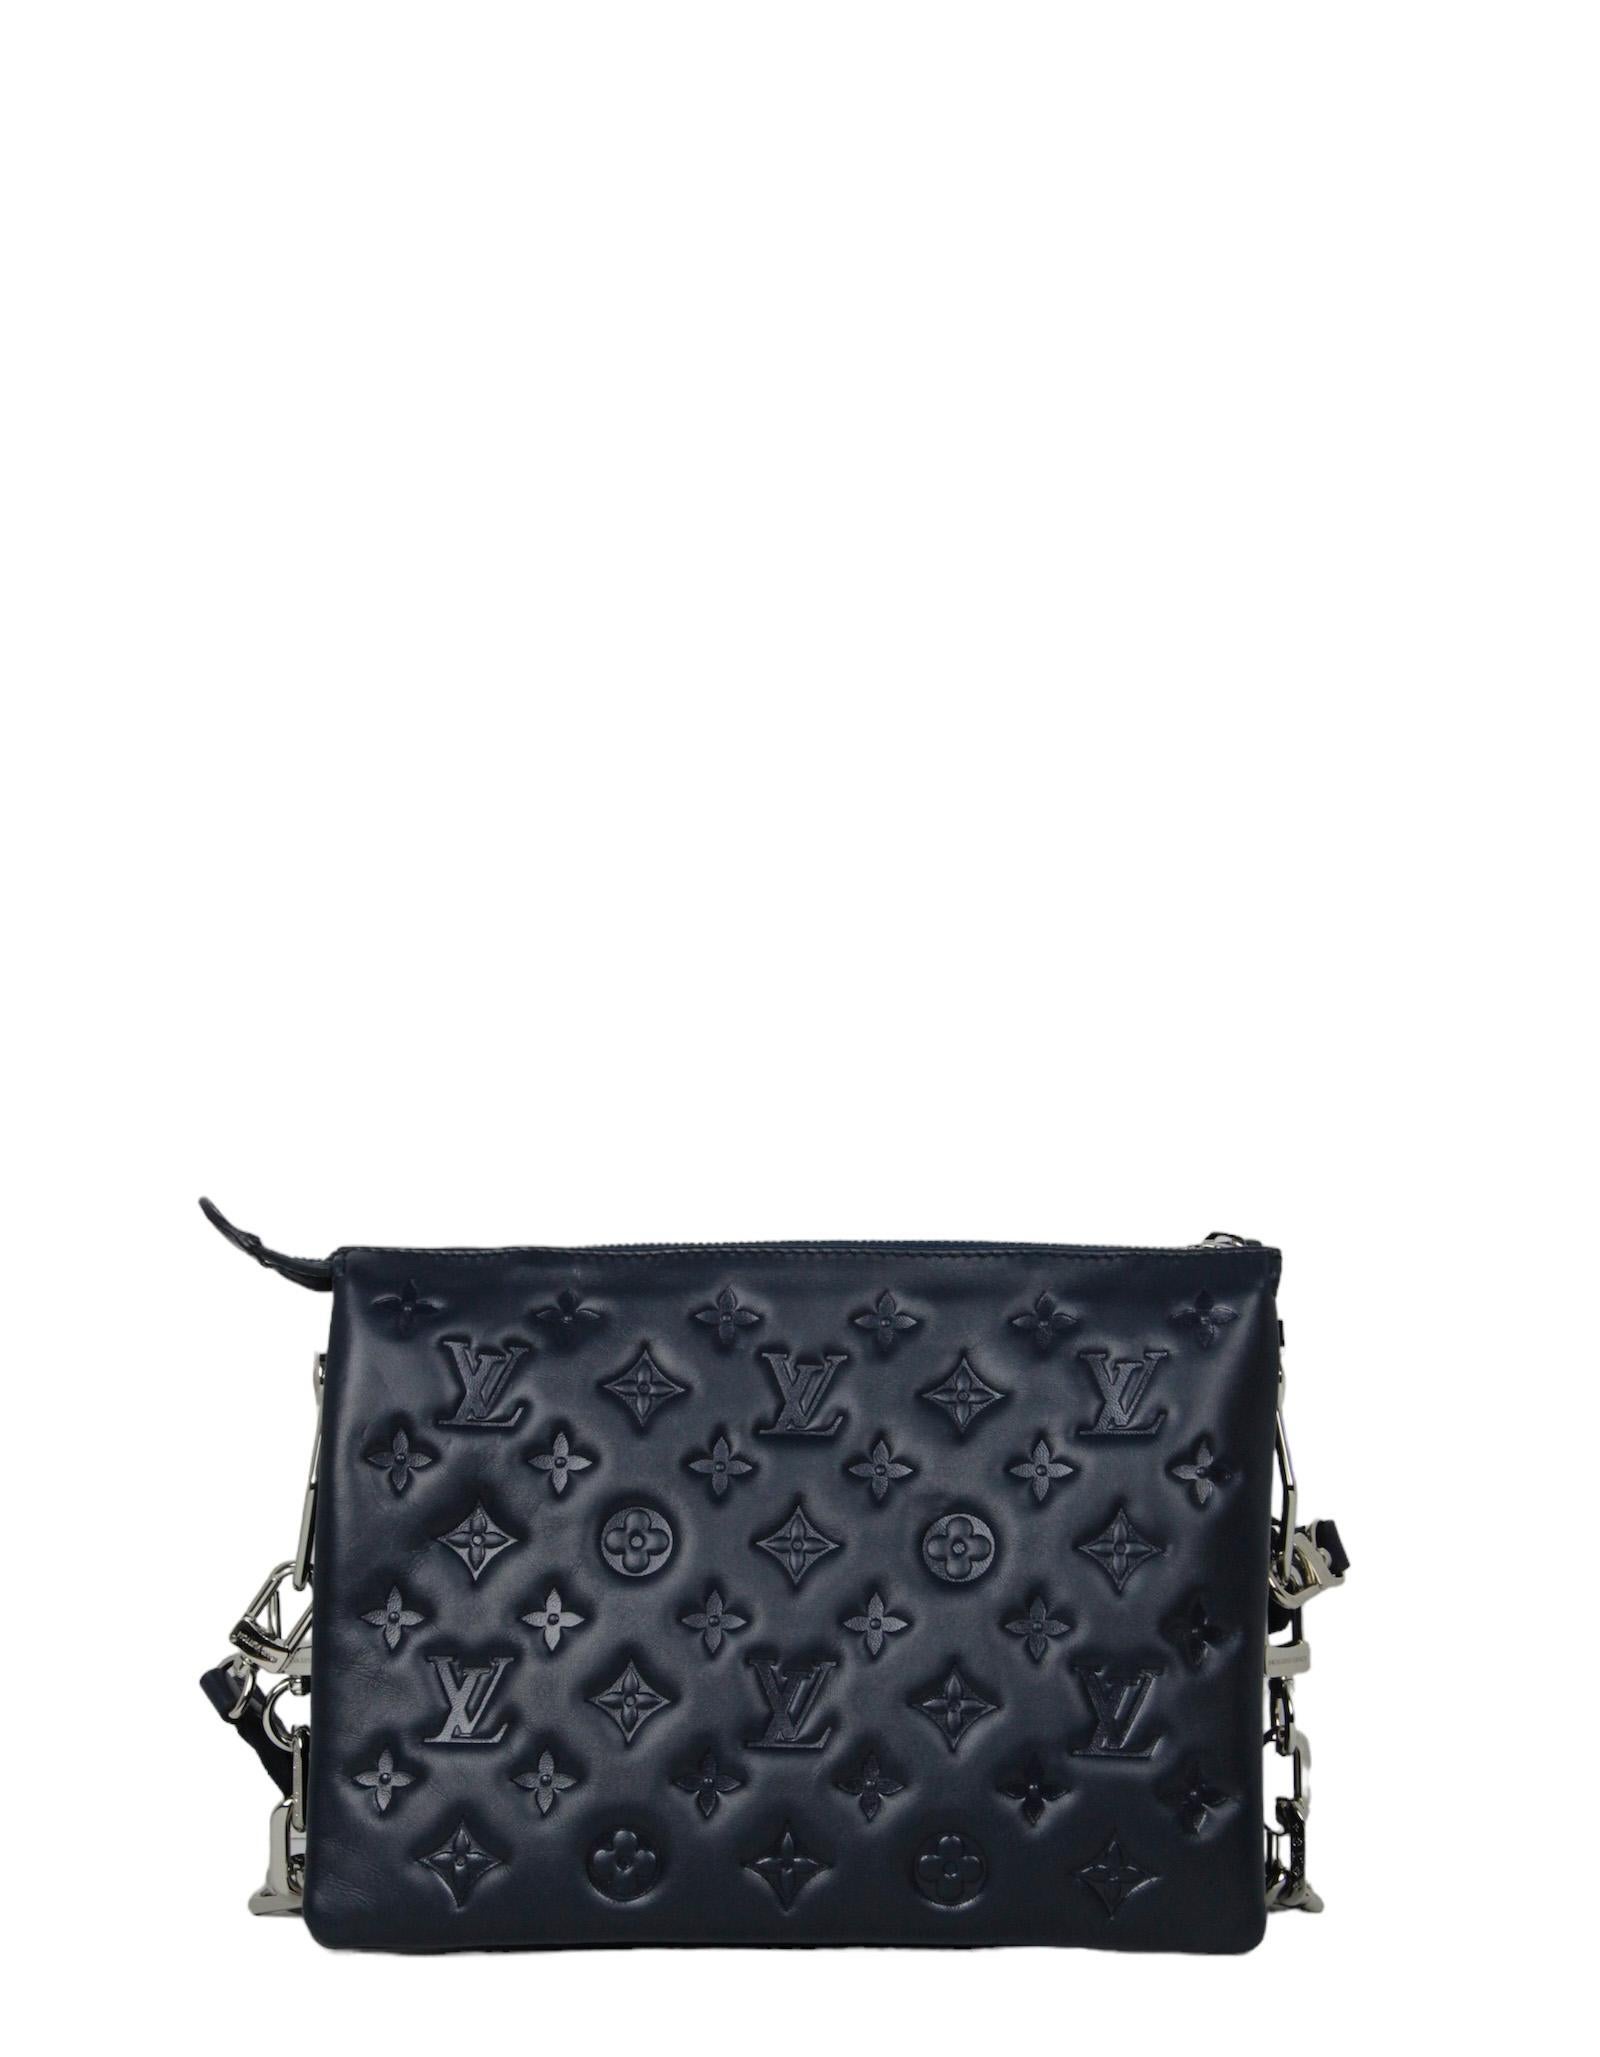 Louis Vuitton '22 Navy Lambskin Monogram Coussin PM Bag In Excellent Condition For Sale In New York, NY